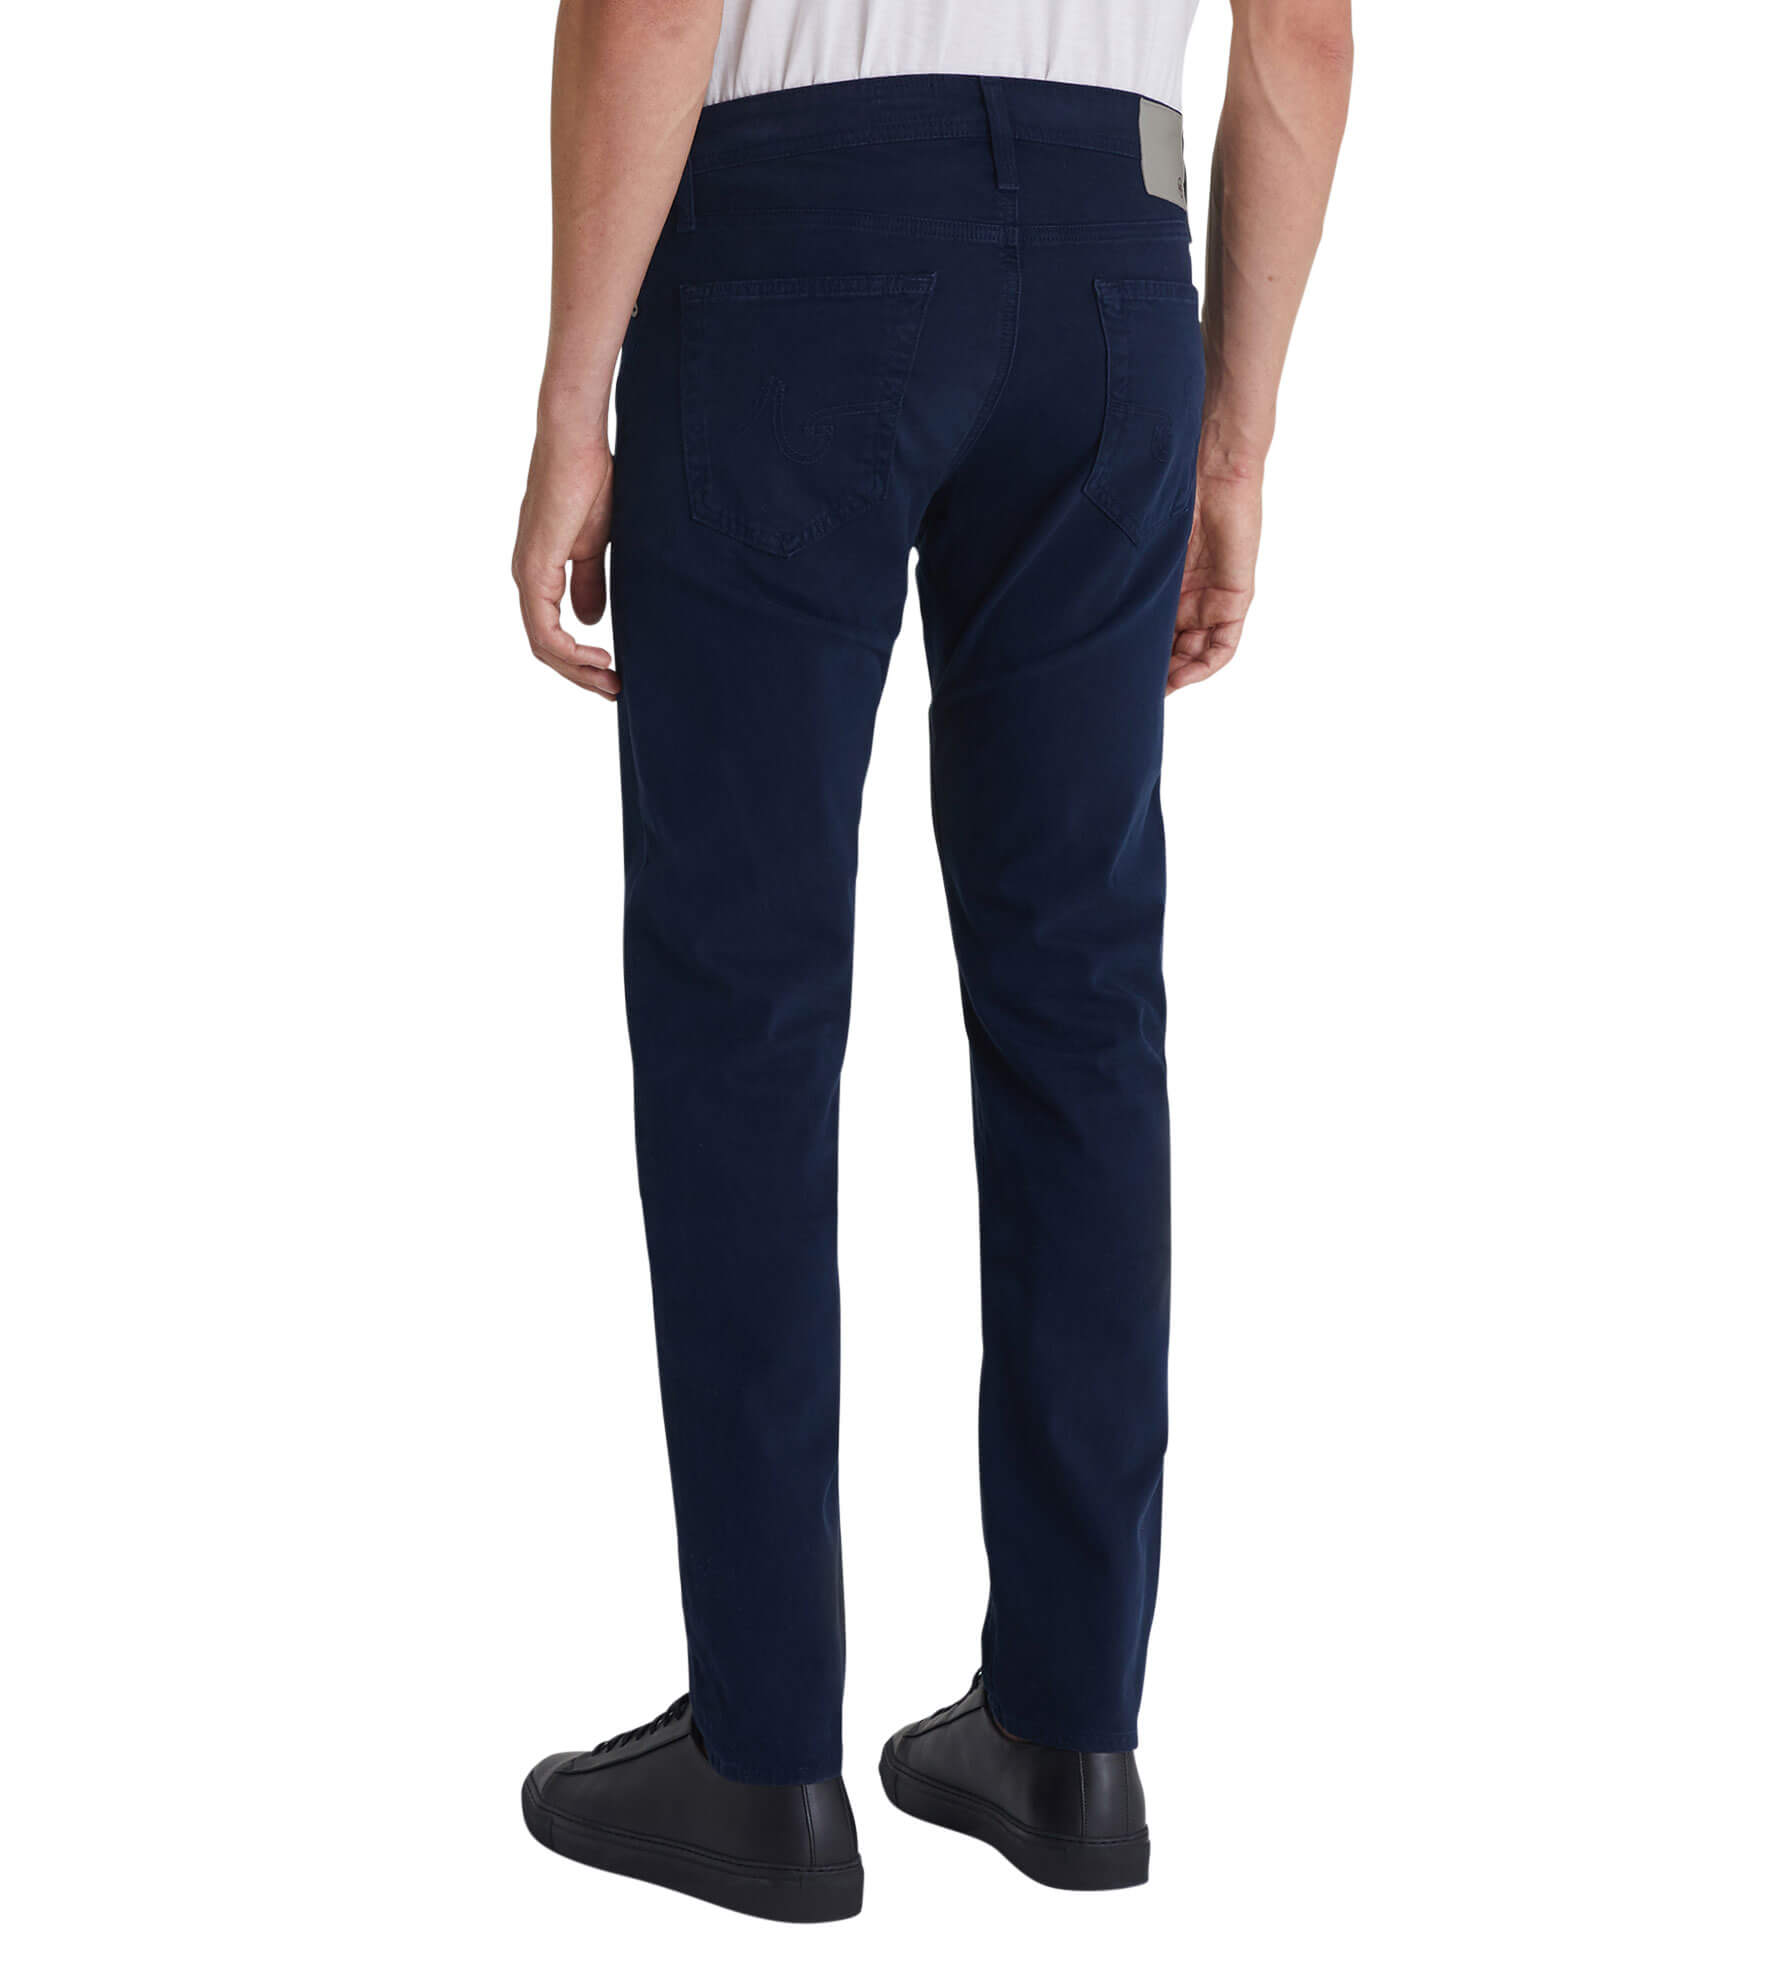 Mens Trousers - Buy Mens Trousers Online Starting at Just ₹179 | Meesho